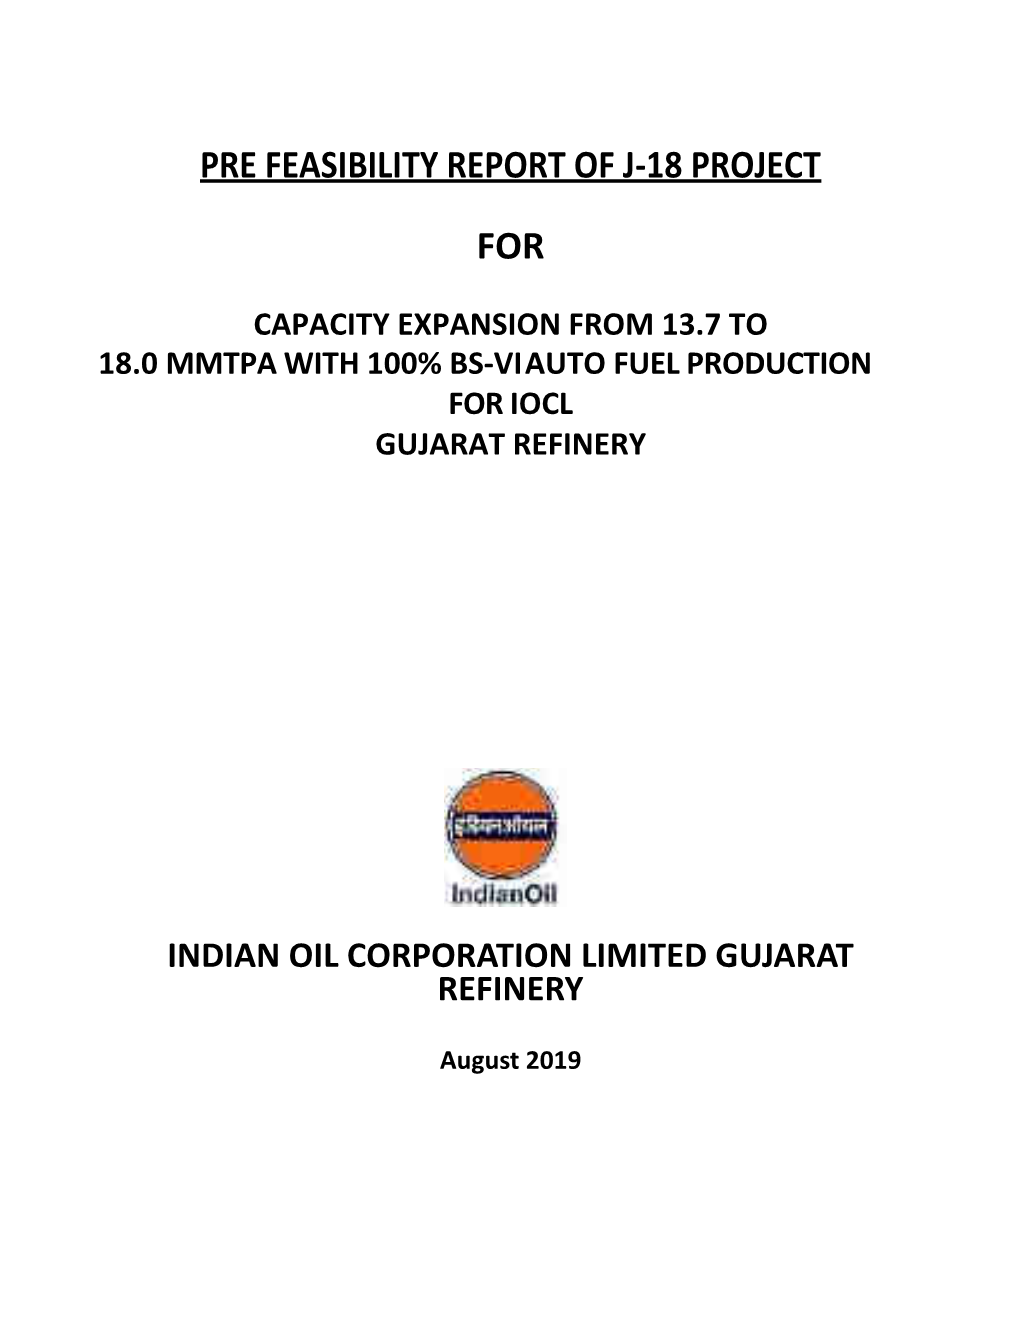 Pre Feasibility Report of J-18 Project